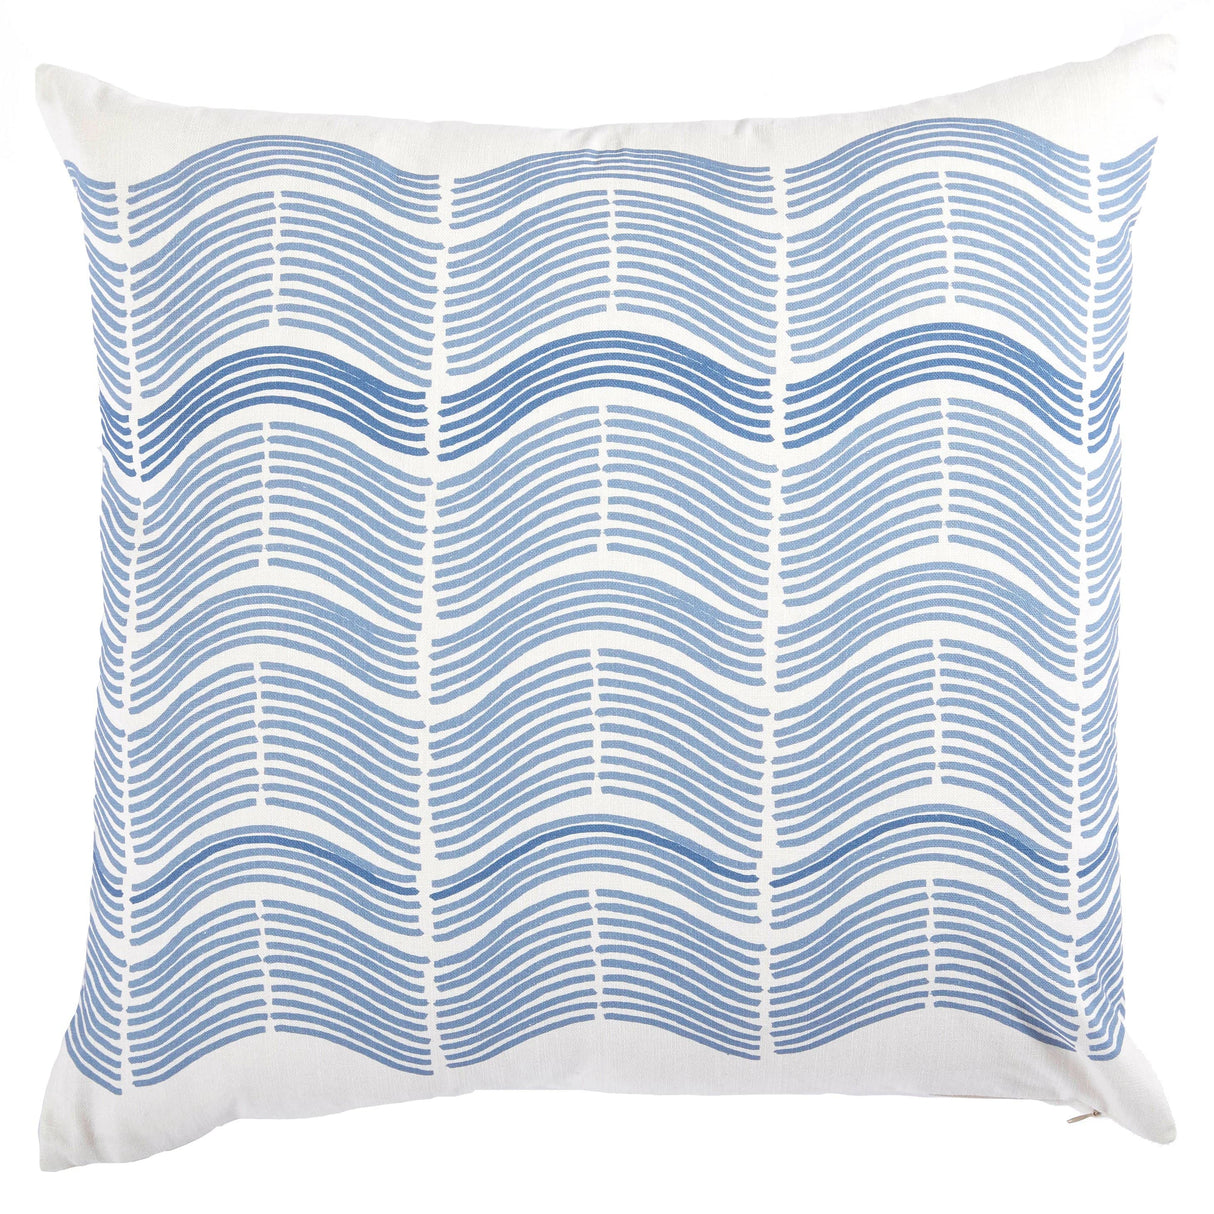 Lacefield Designs Sonary Stripe Knife Edge Pillow Pillow & Decor lacefield-D1489